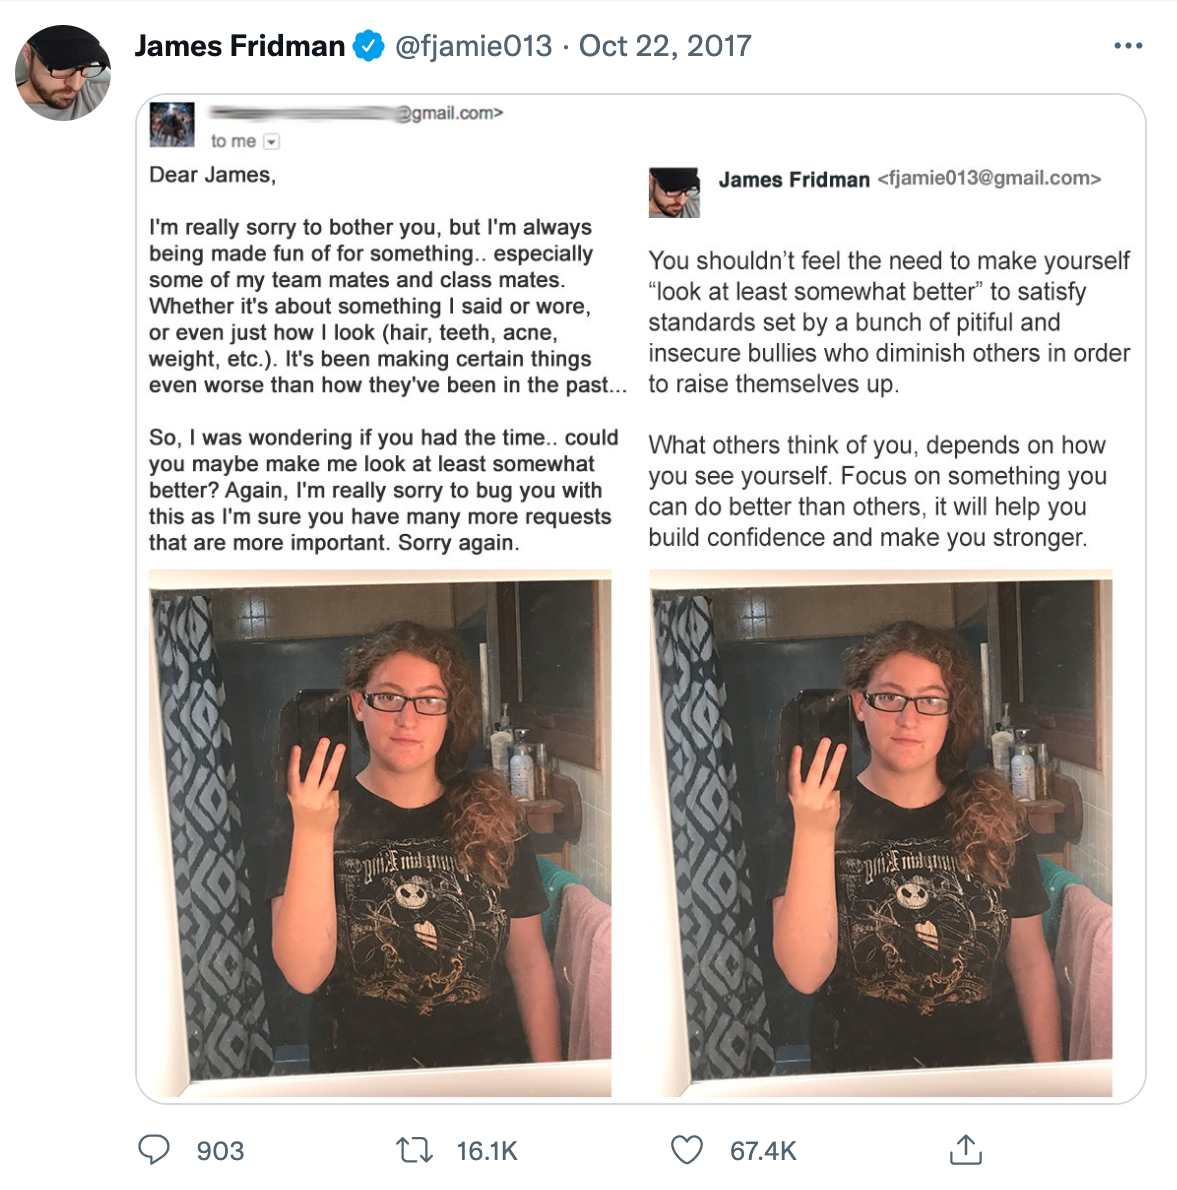 wholesome photoshop edits - james fridman wholesome - James Fridman to me. Dear James, I'm really sorry to bother you, but I'm always being made fun of for something.. especially some of my team mates and class mates. Whether it's about something I said o